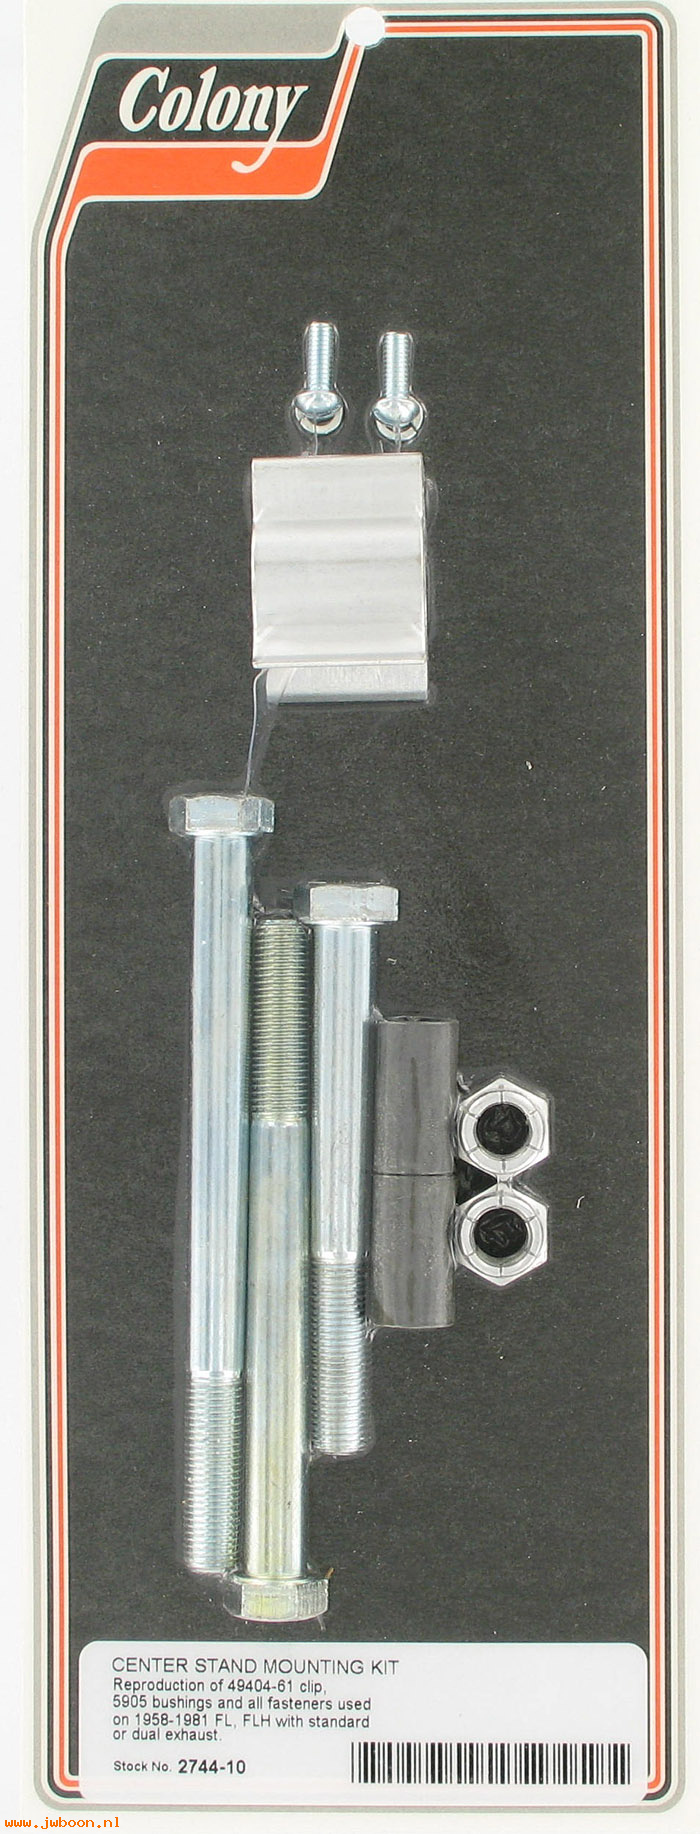 C 2744-10 (49401-61 / 5905): Center stand mounting kit - Big Twins FL '58-'81, in stock